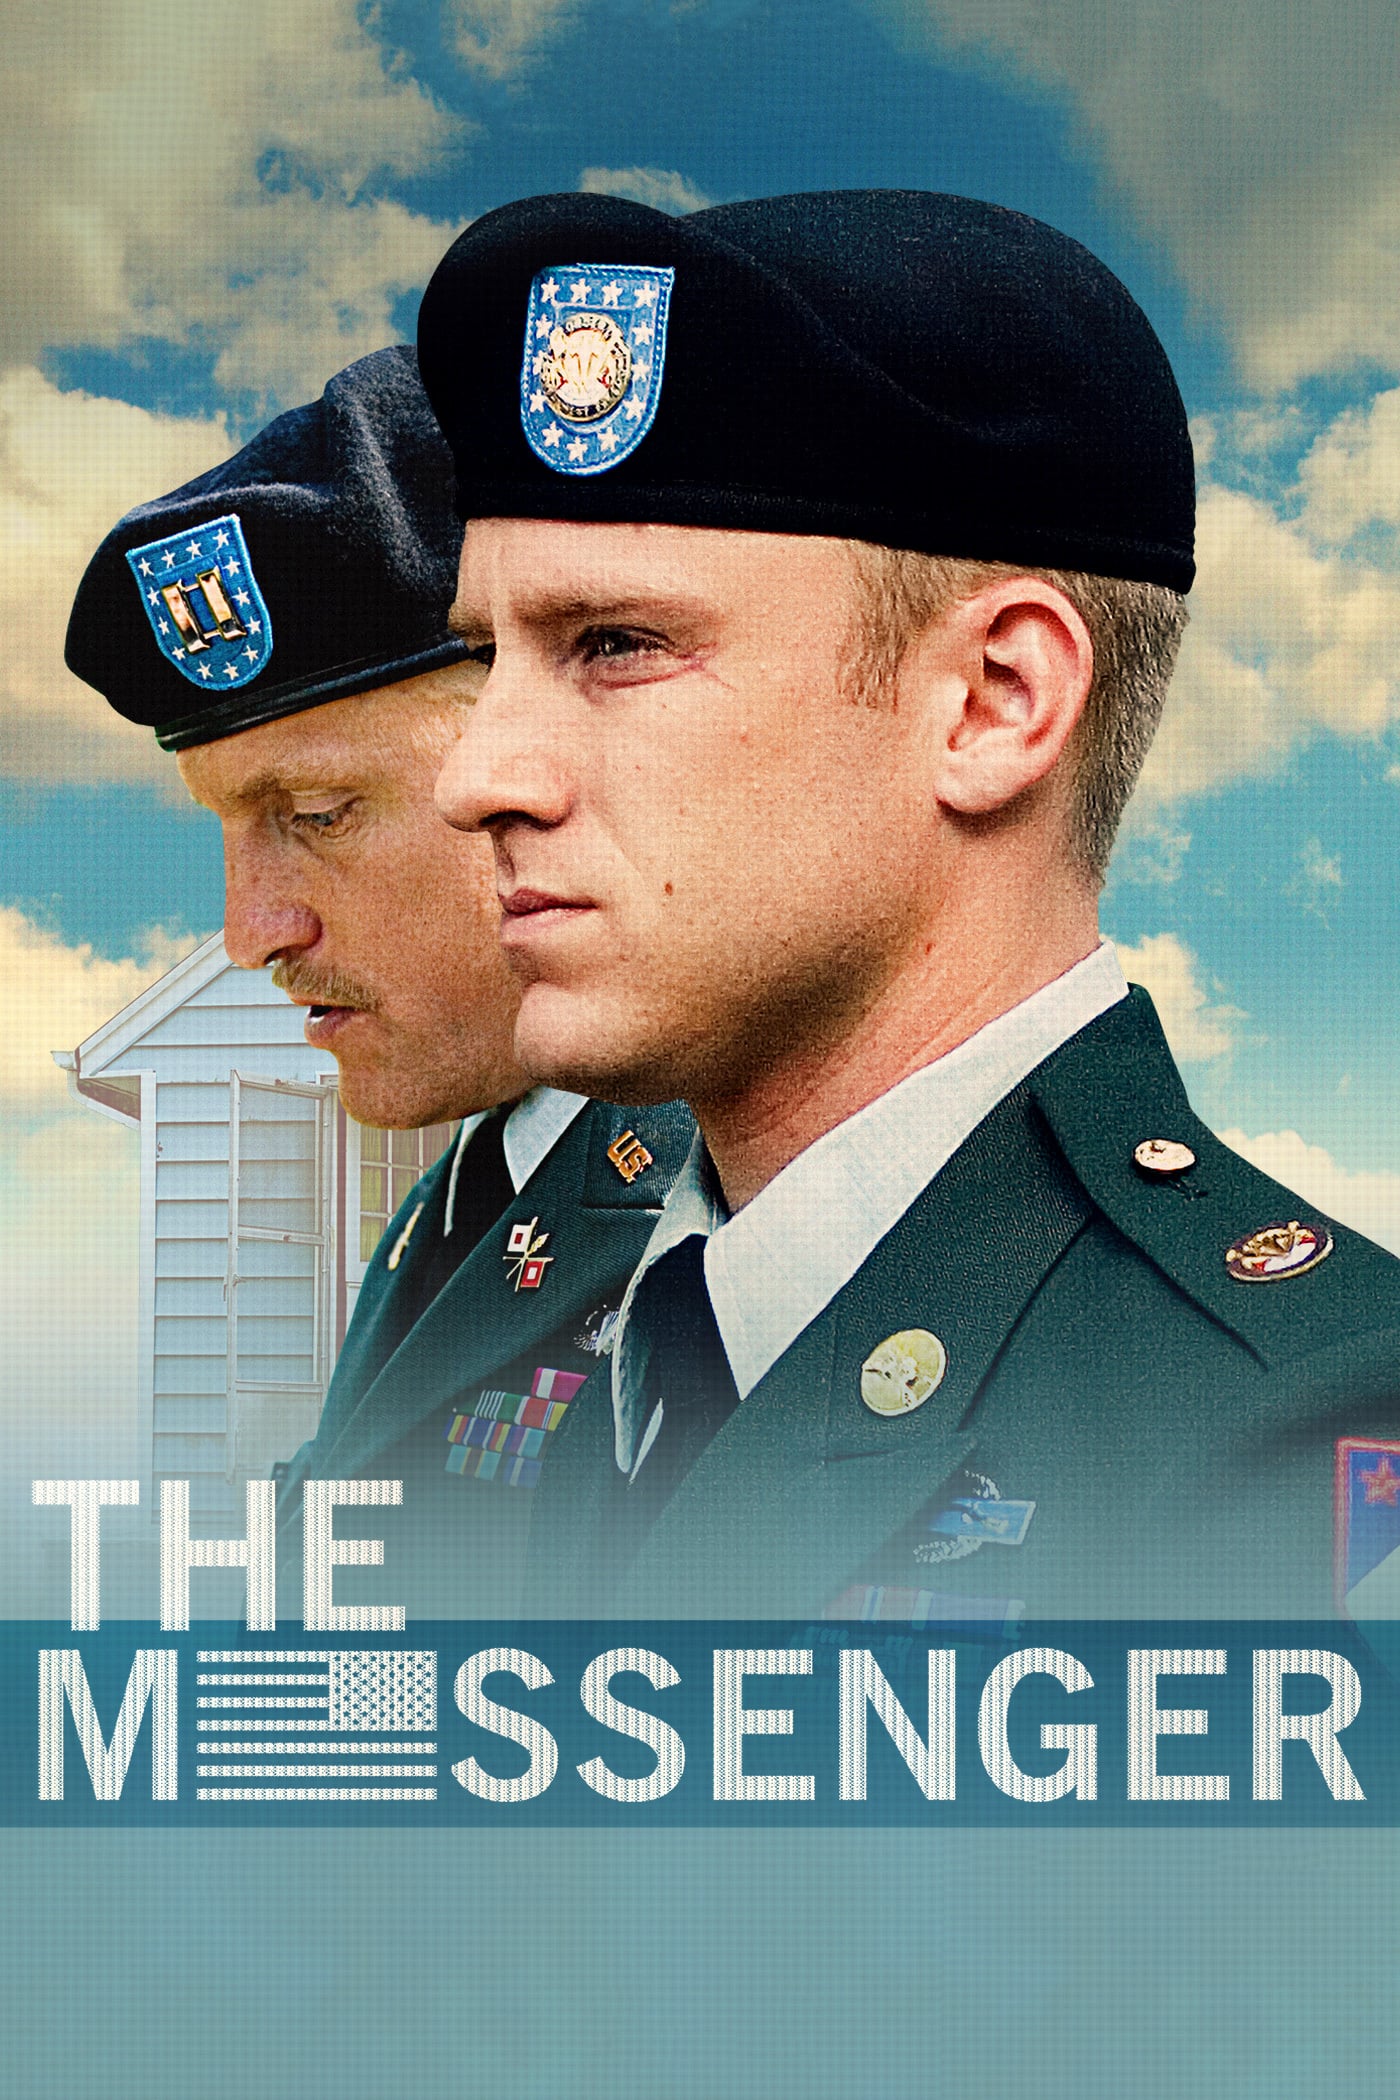 Poster for the movie "The Messenger"